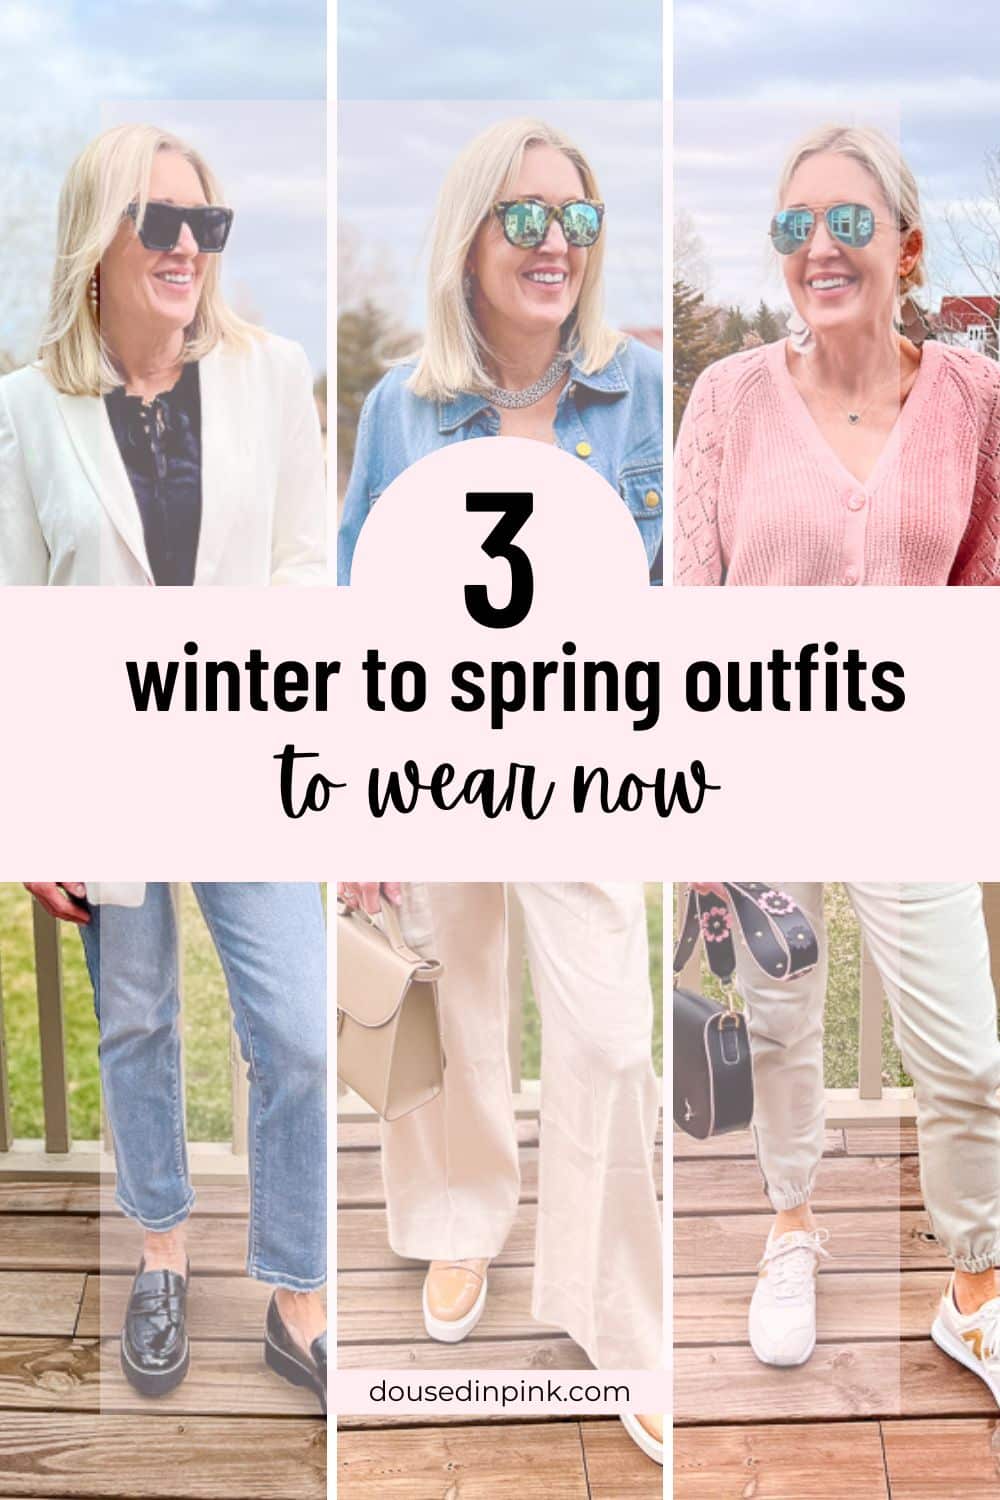 3 winter to spring outfits to wear now